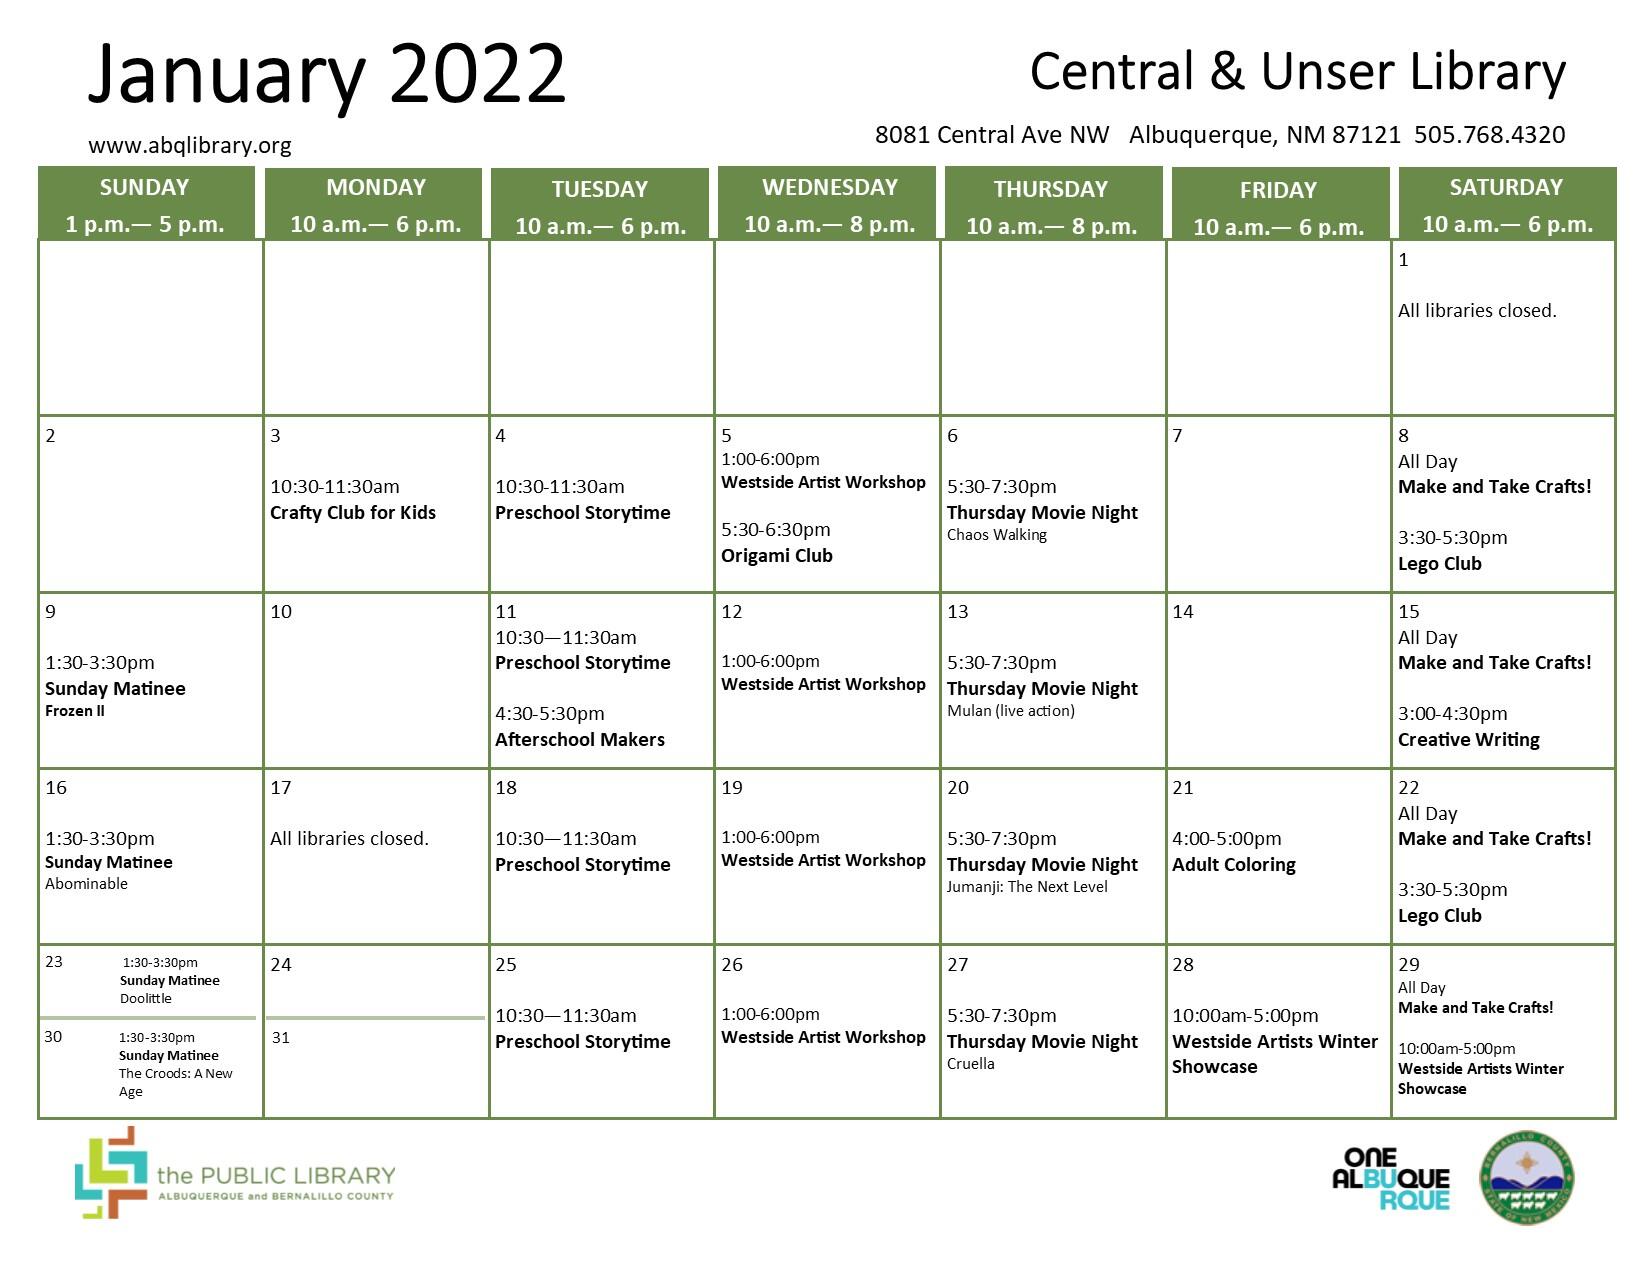 Central & Unser Library, January 2022 Calendar & Programs (City of